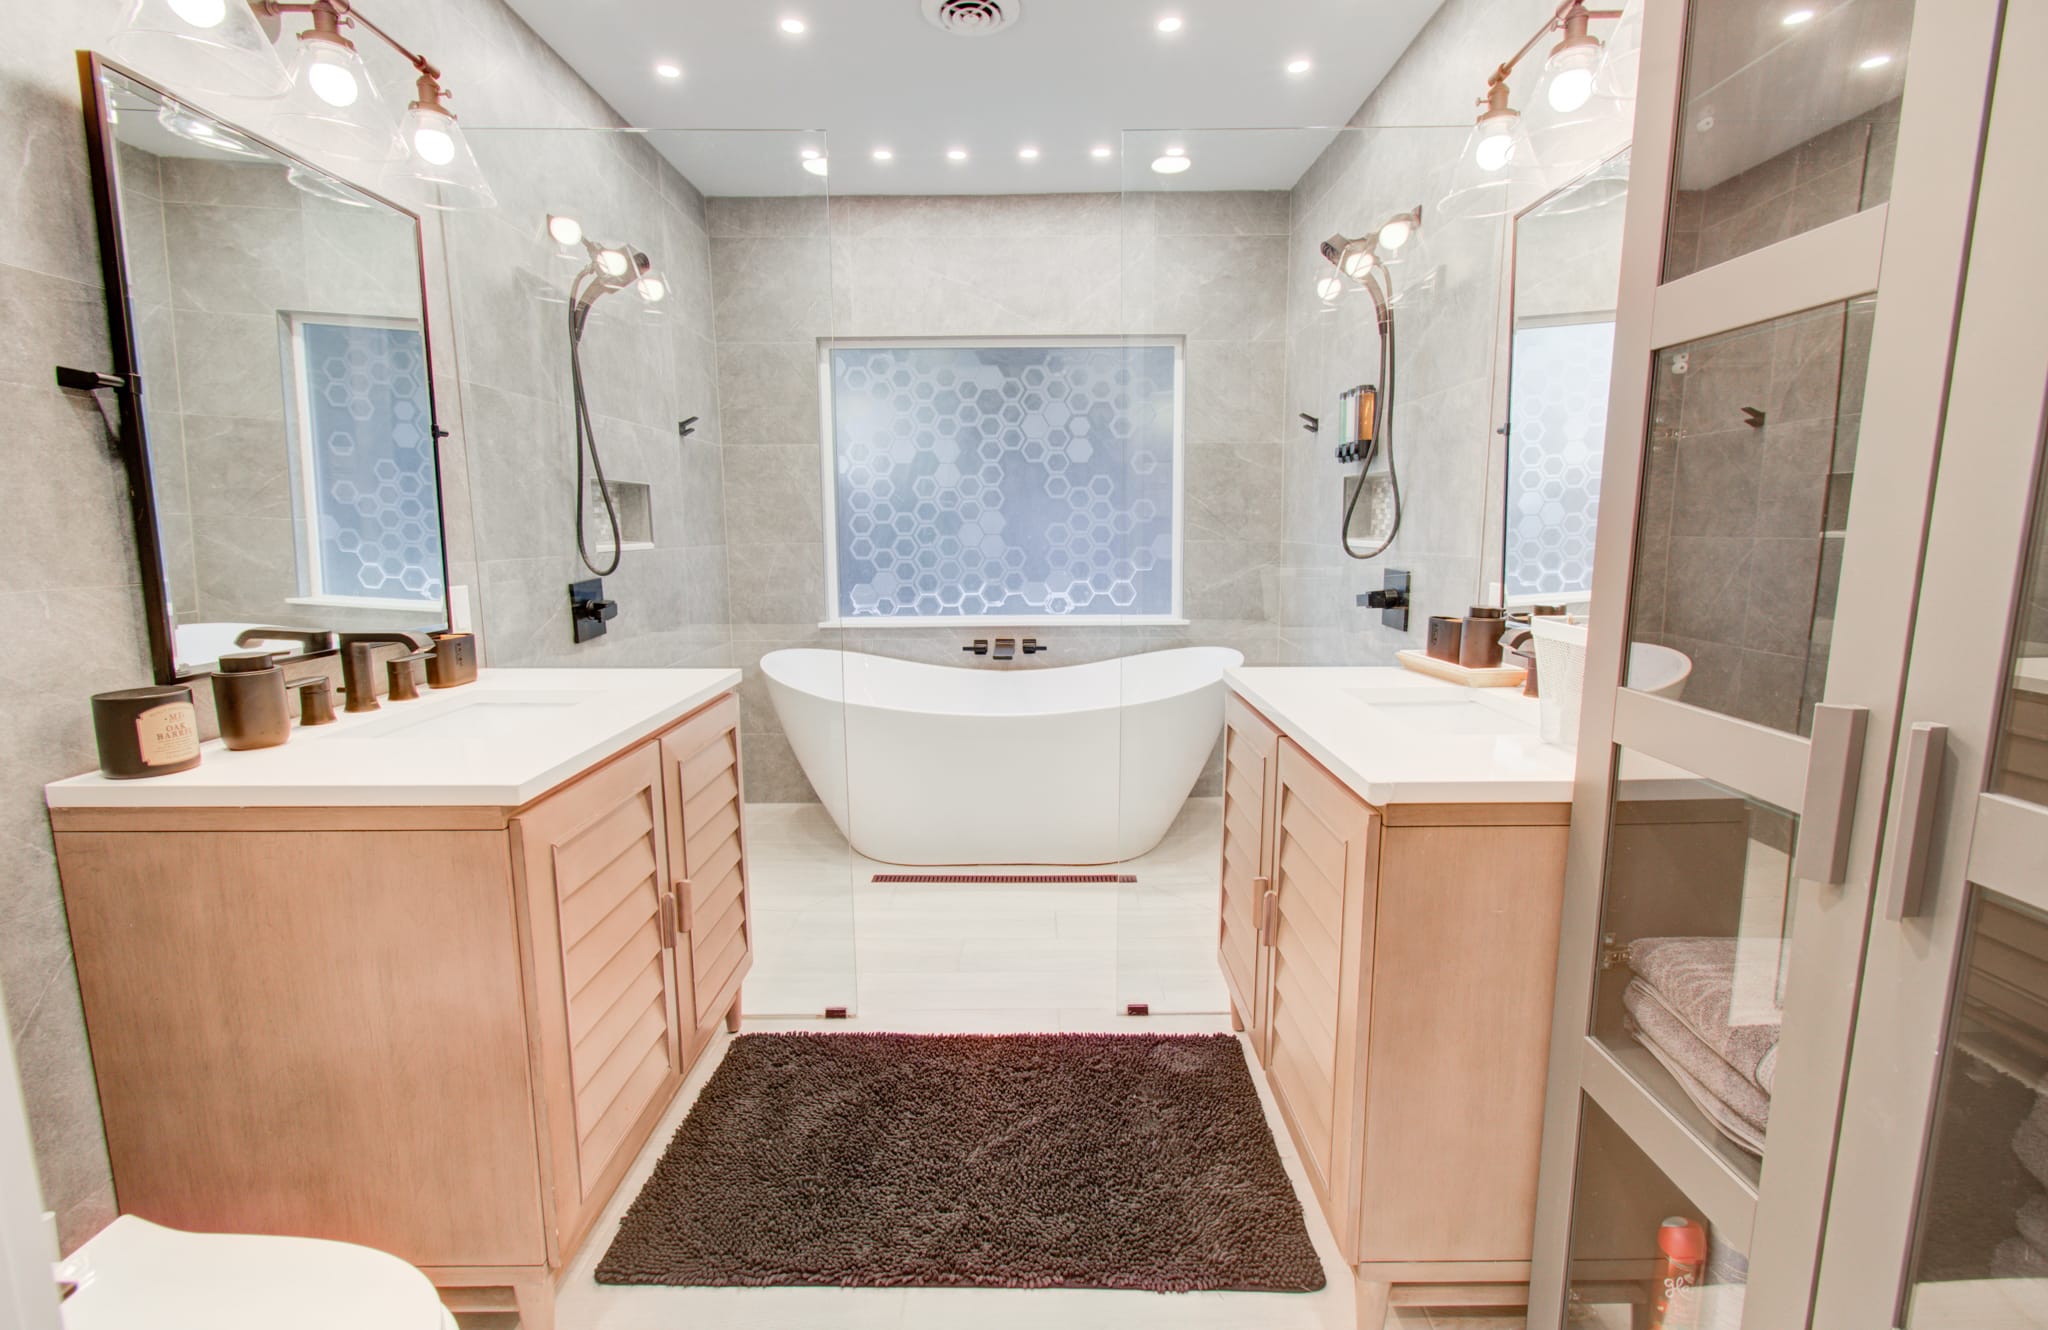 Go ahead and cancel your spa appointment. With a bathroom as nice as this one’s, you can get the spa experience right here in your home away from home!